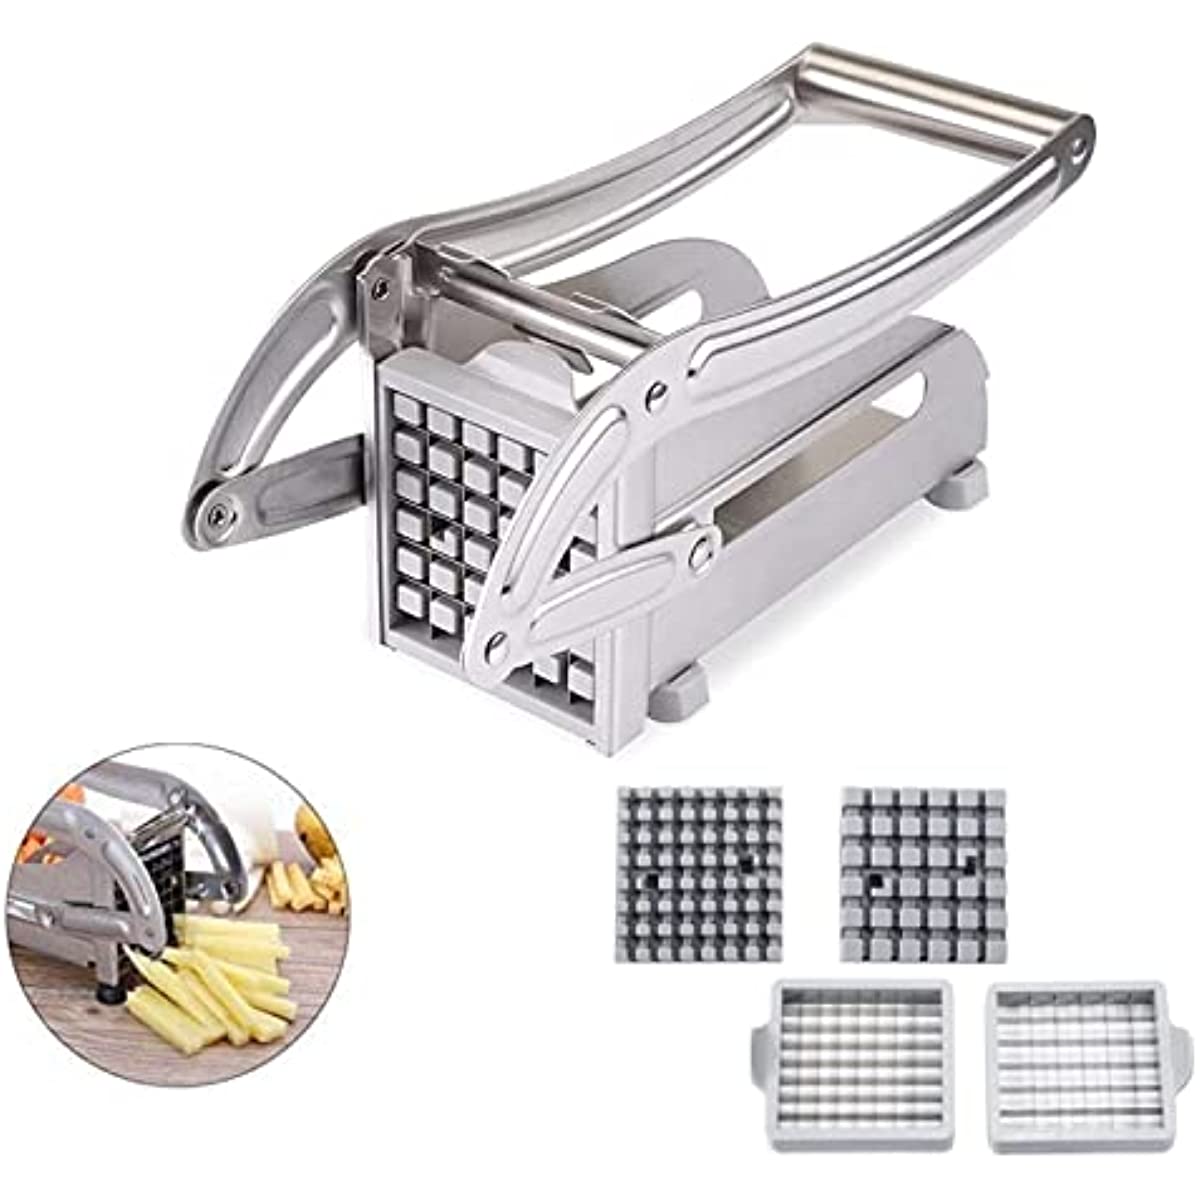 Stainless Steel Chopper Maker French Fry Cutter No-Slip Suction